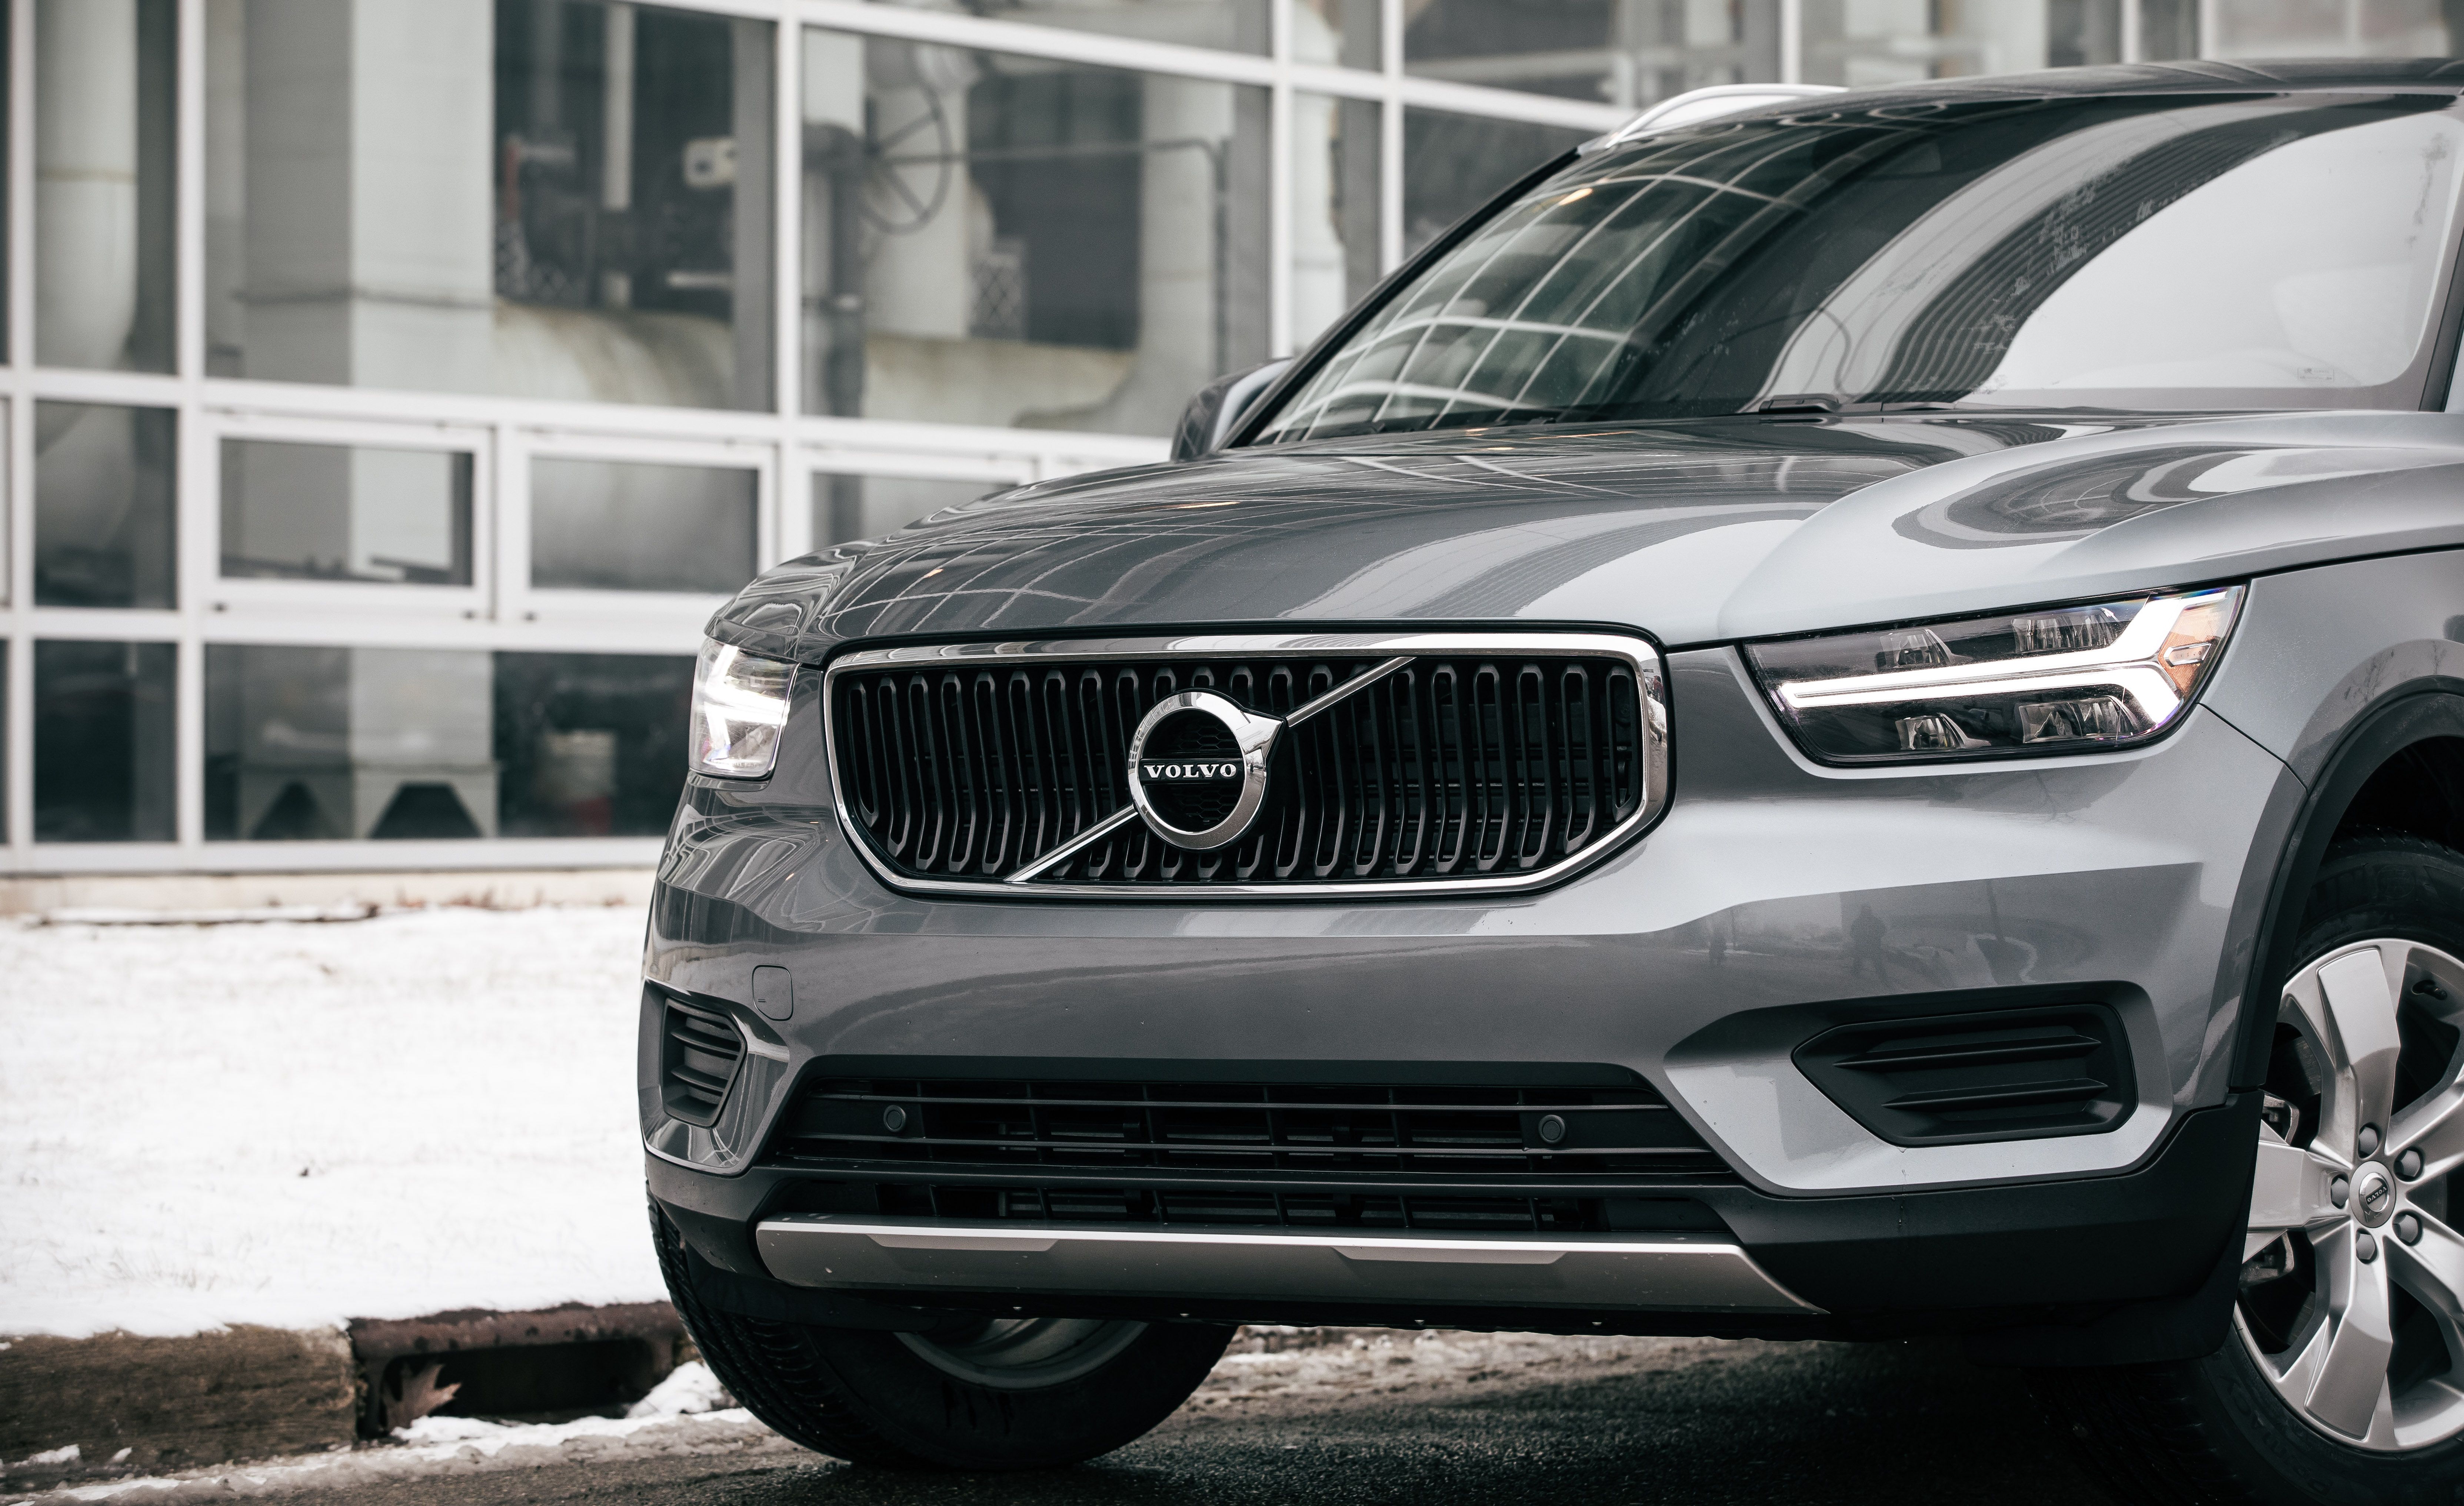 View Every Angle Of The 19 Volvo Xc40 T4 In Photos